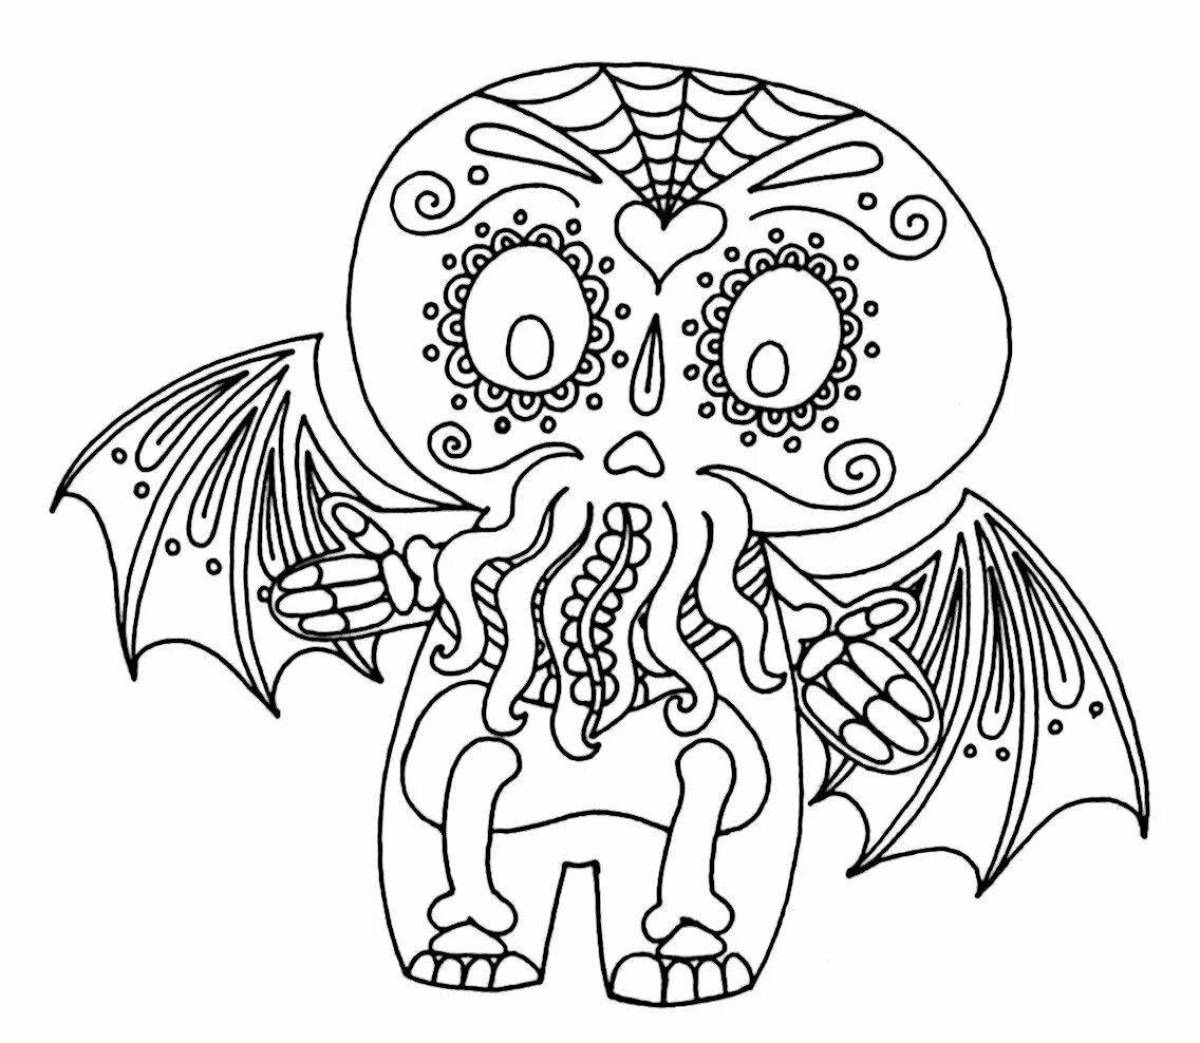 Great cthulhu coloring book